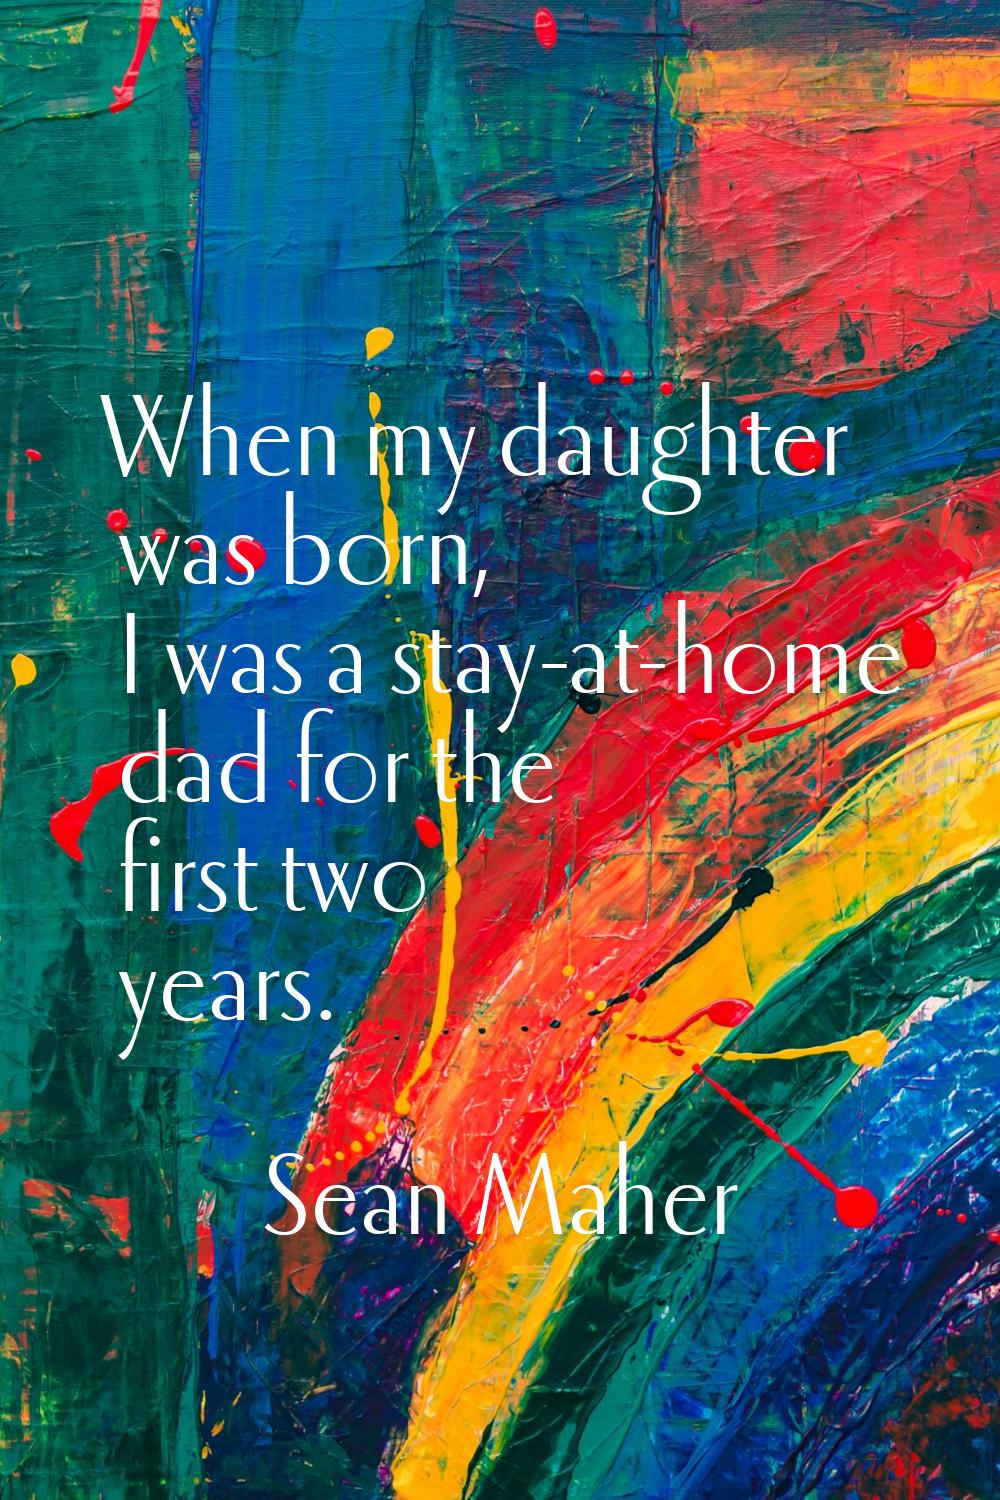 When my daughter was born, I was a stay-at-home dad for the first two years.